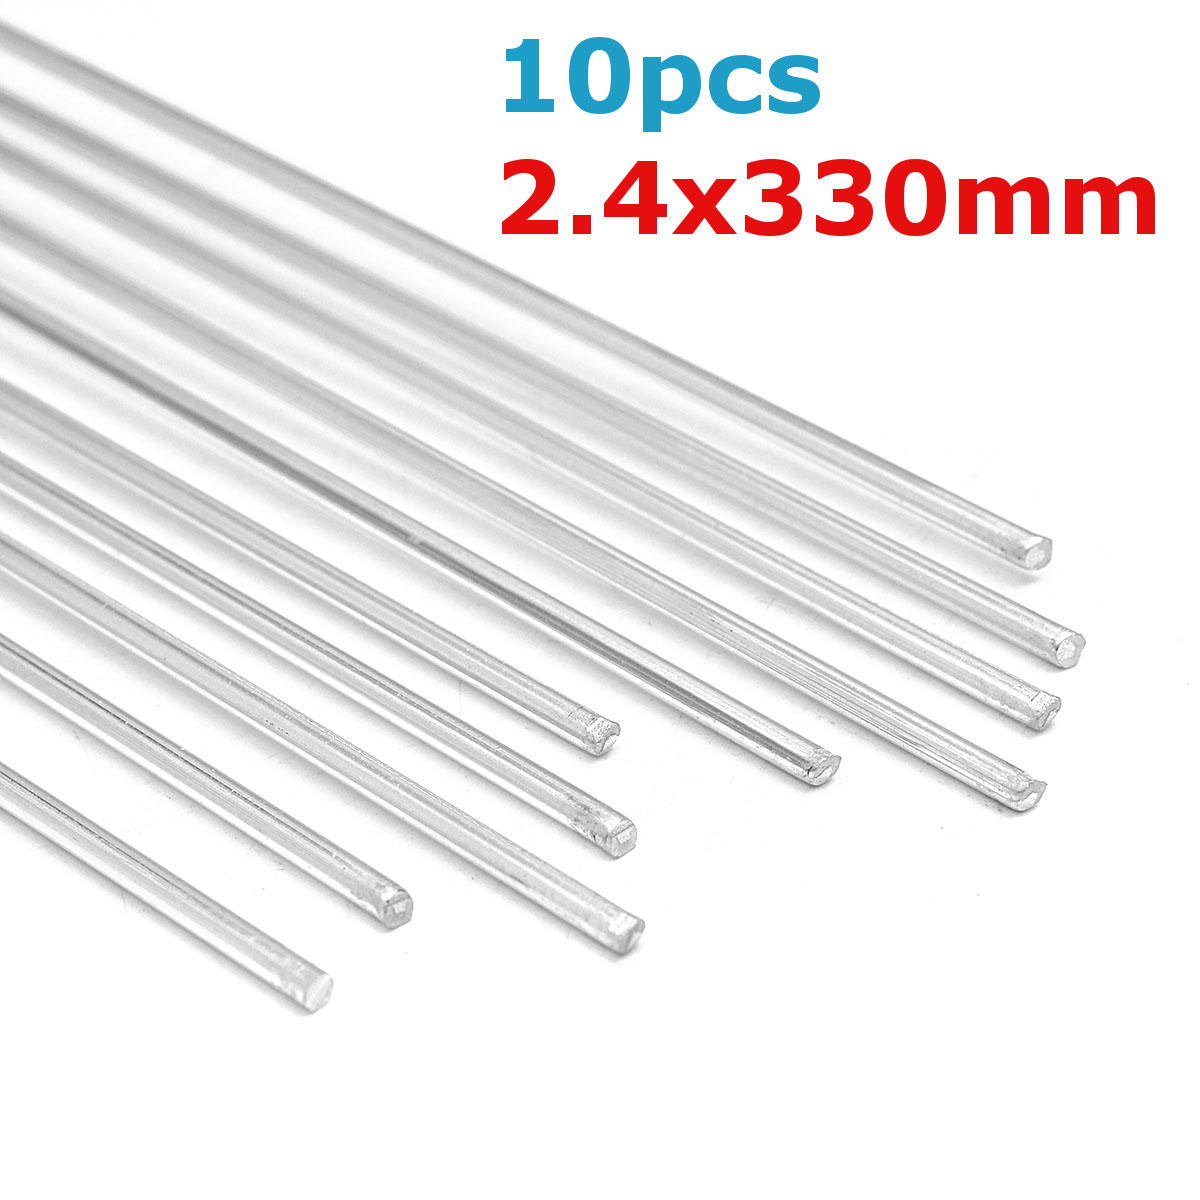 

10Pcs 2.4mmx330mm Aluminum Alloy Silver TIG Filler Rods Welding Brazing Wire Tools